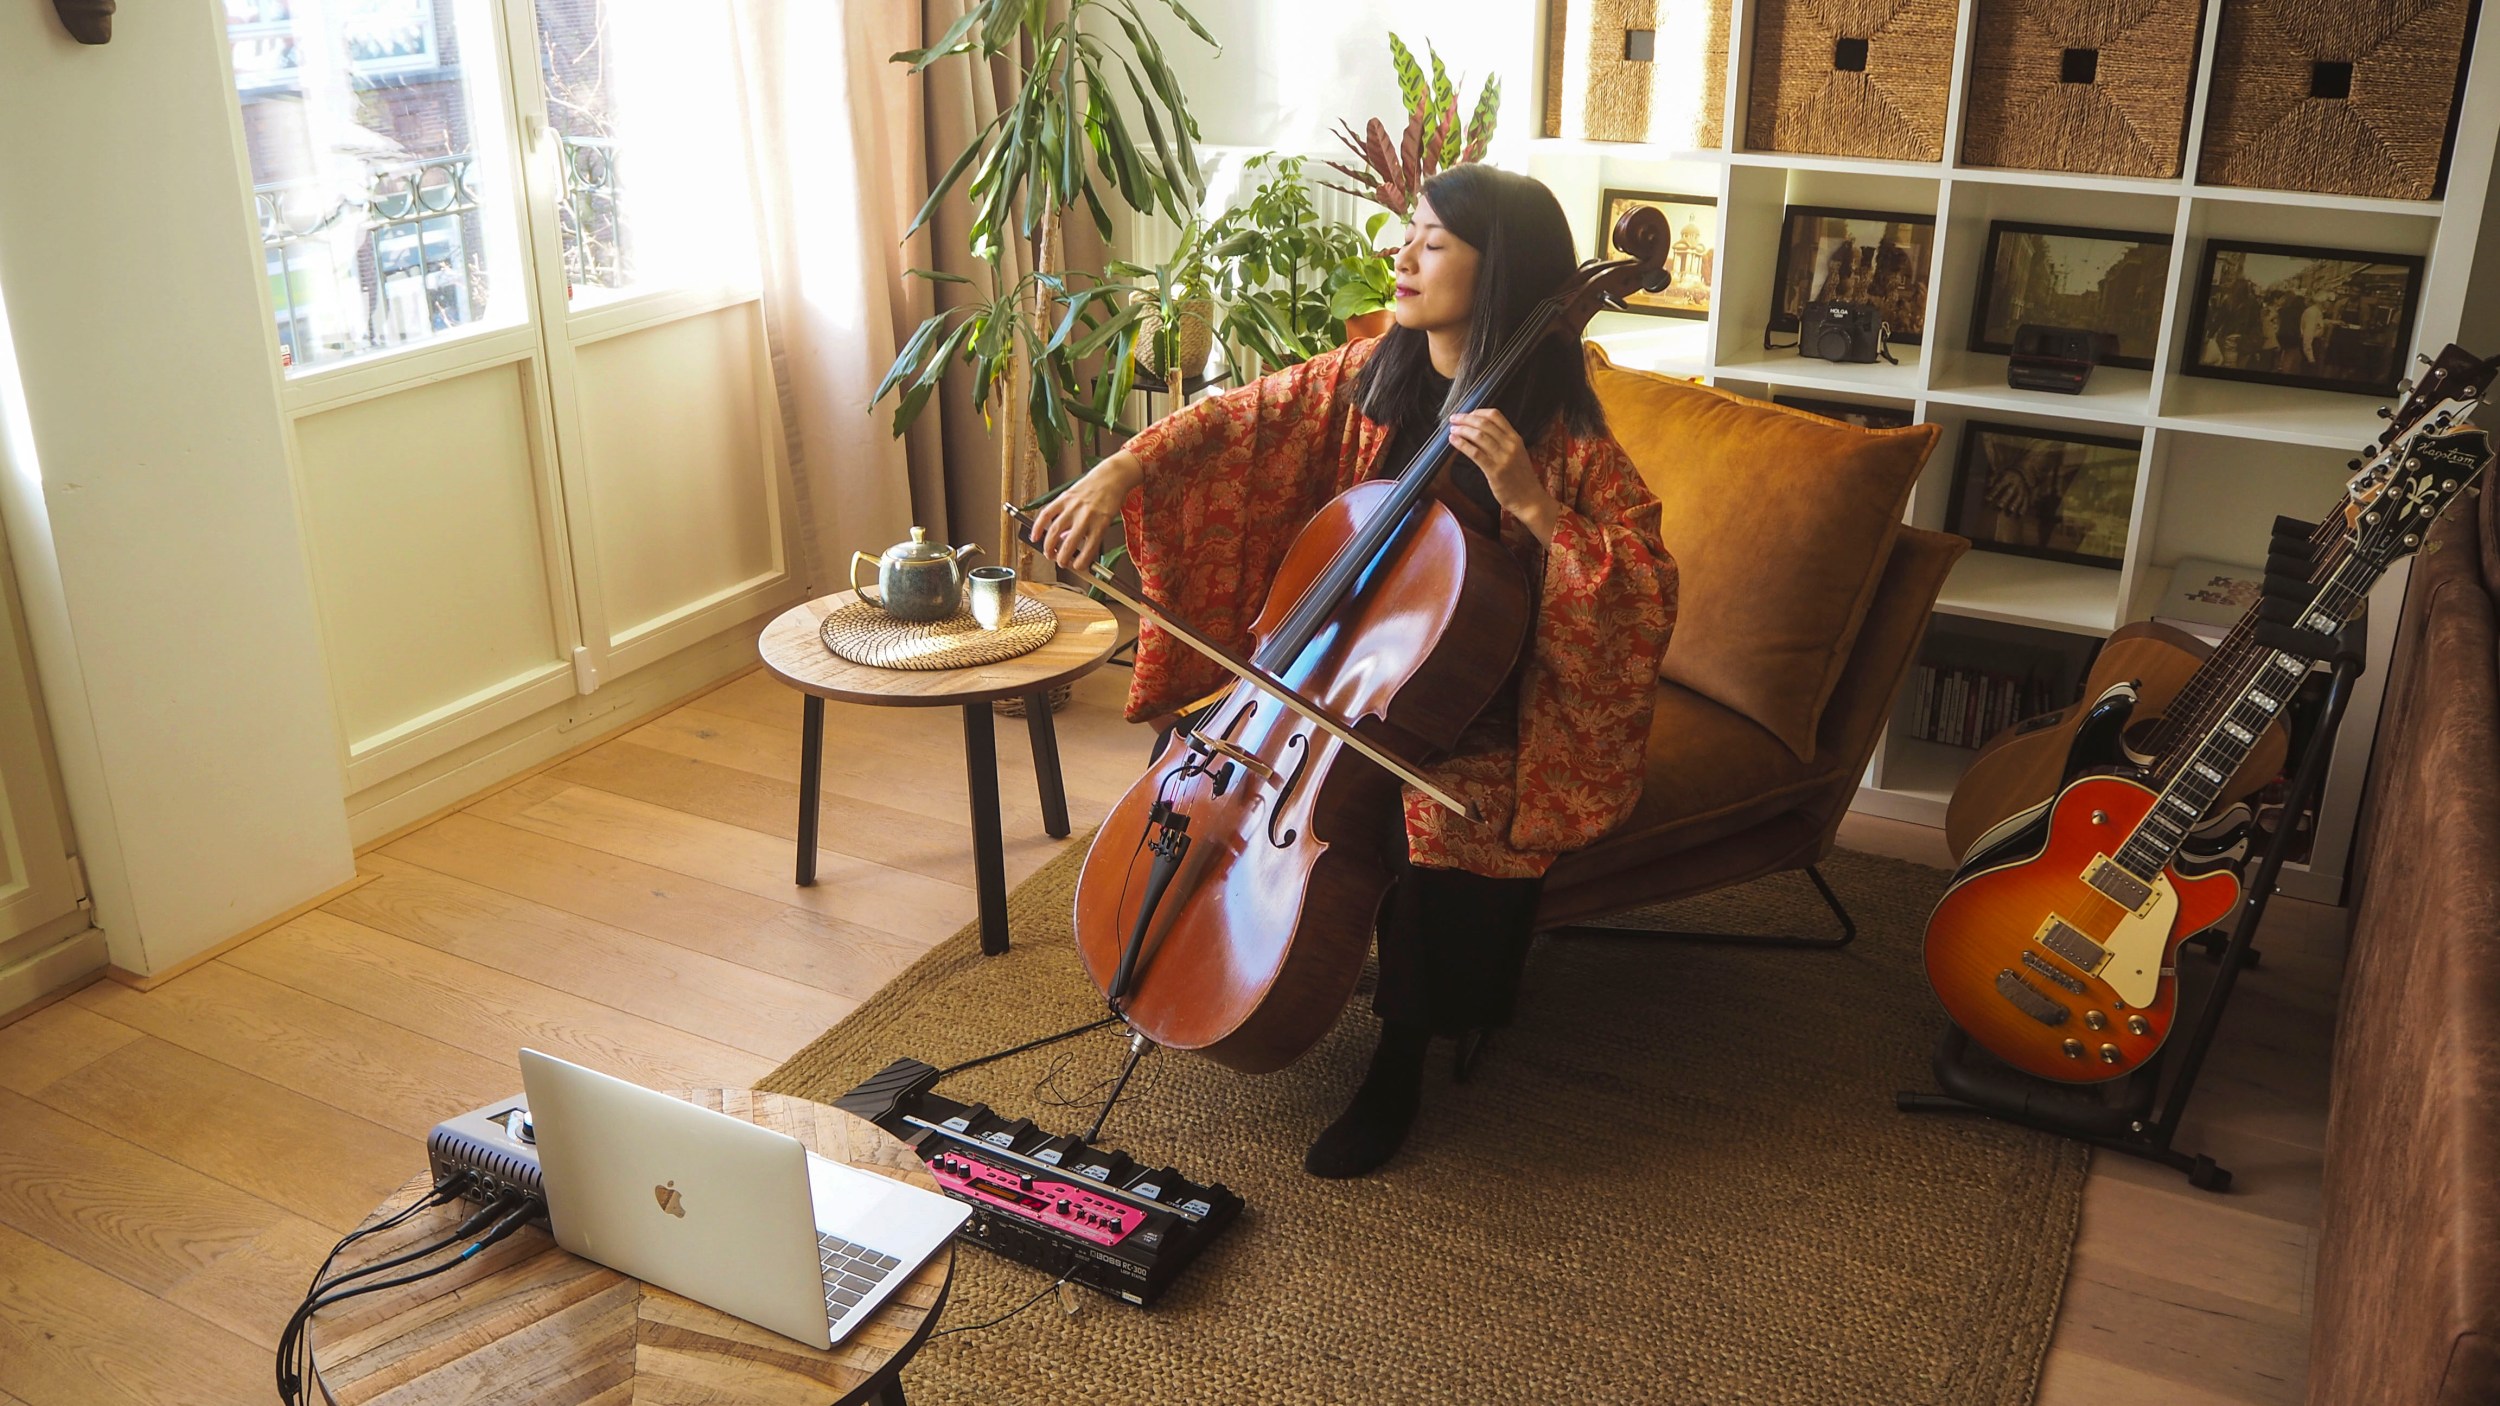 A musician plays her cello to an online audience using Airbnb Online Experiences.